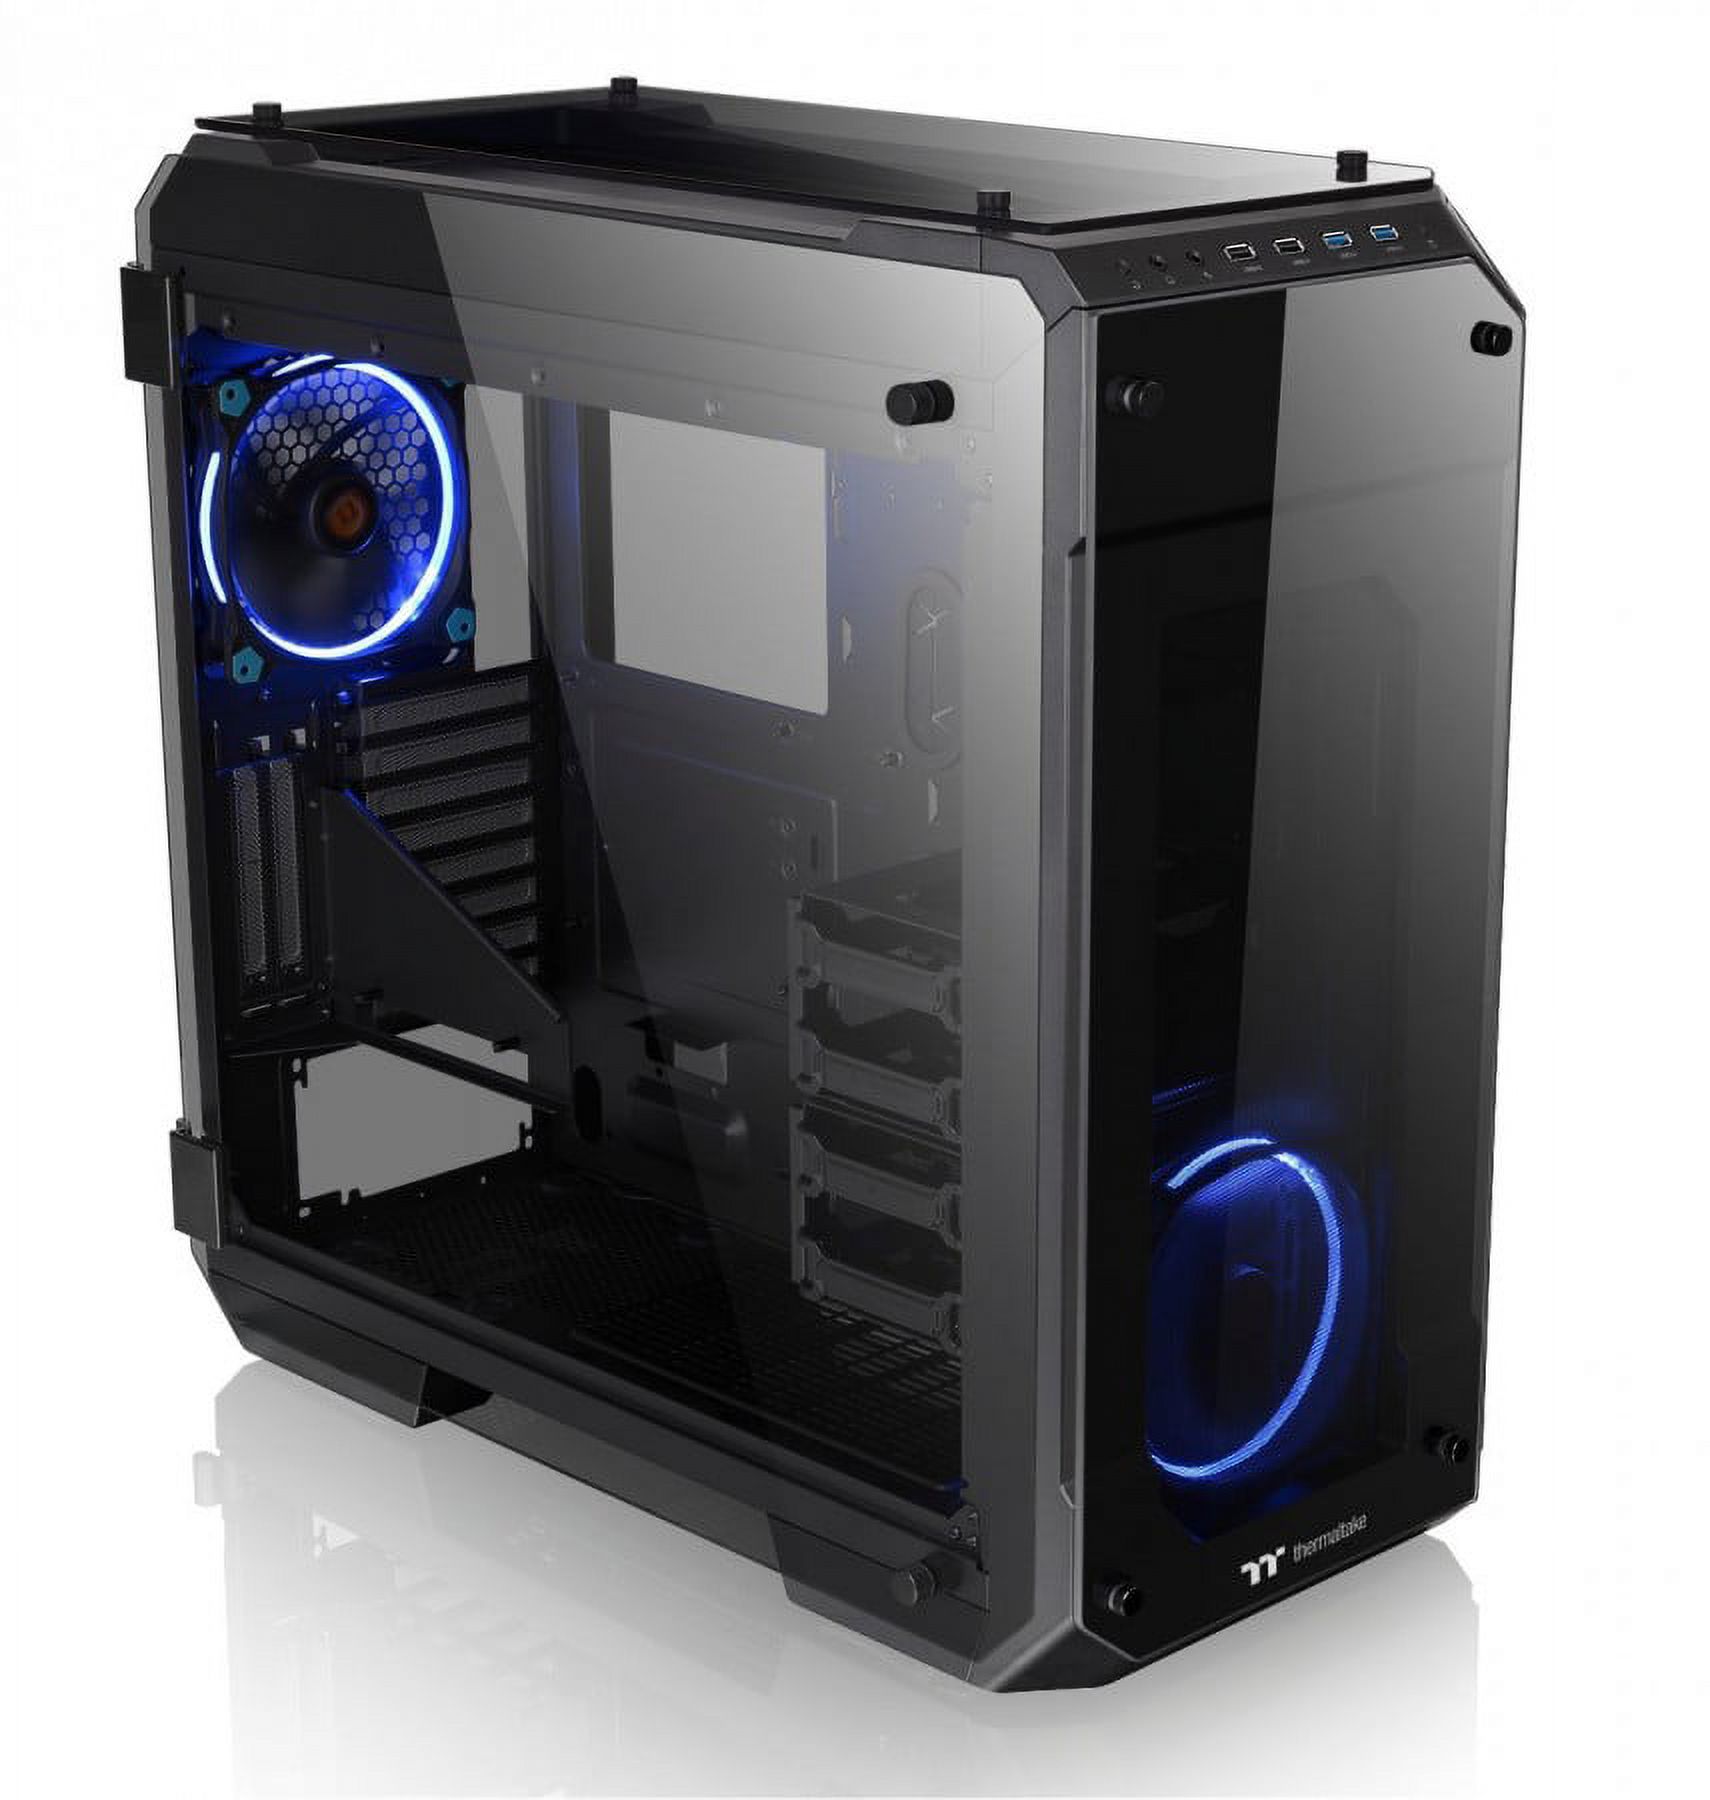 Thermaltake View 71 E-ATX Full Tower Computer Case - Black. - image 1 of 5